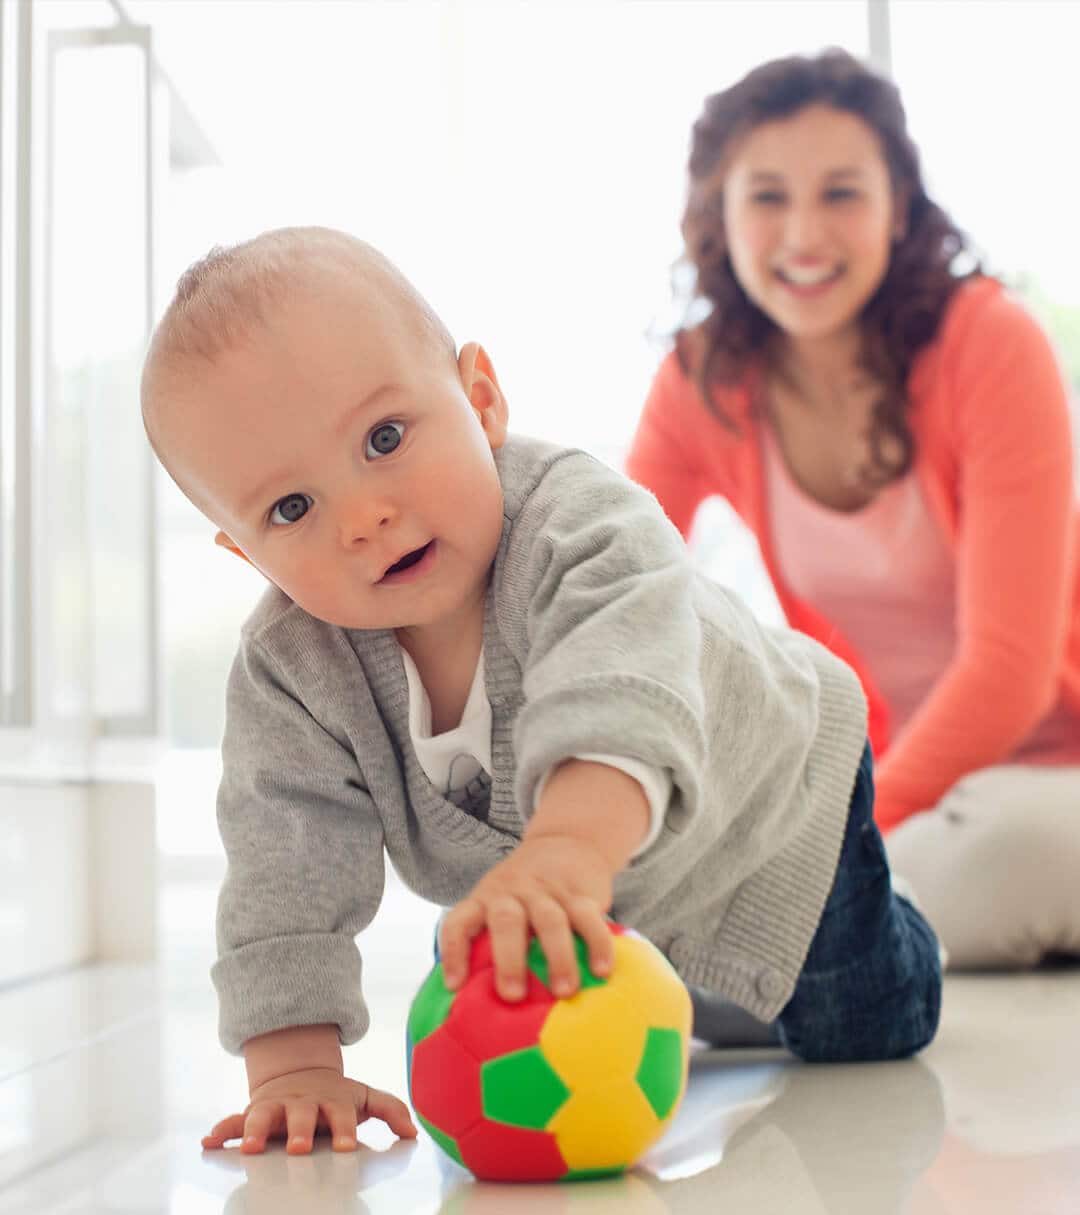 Woman and baby playing with a toy ball